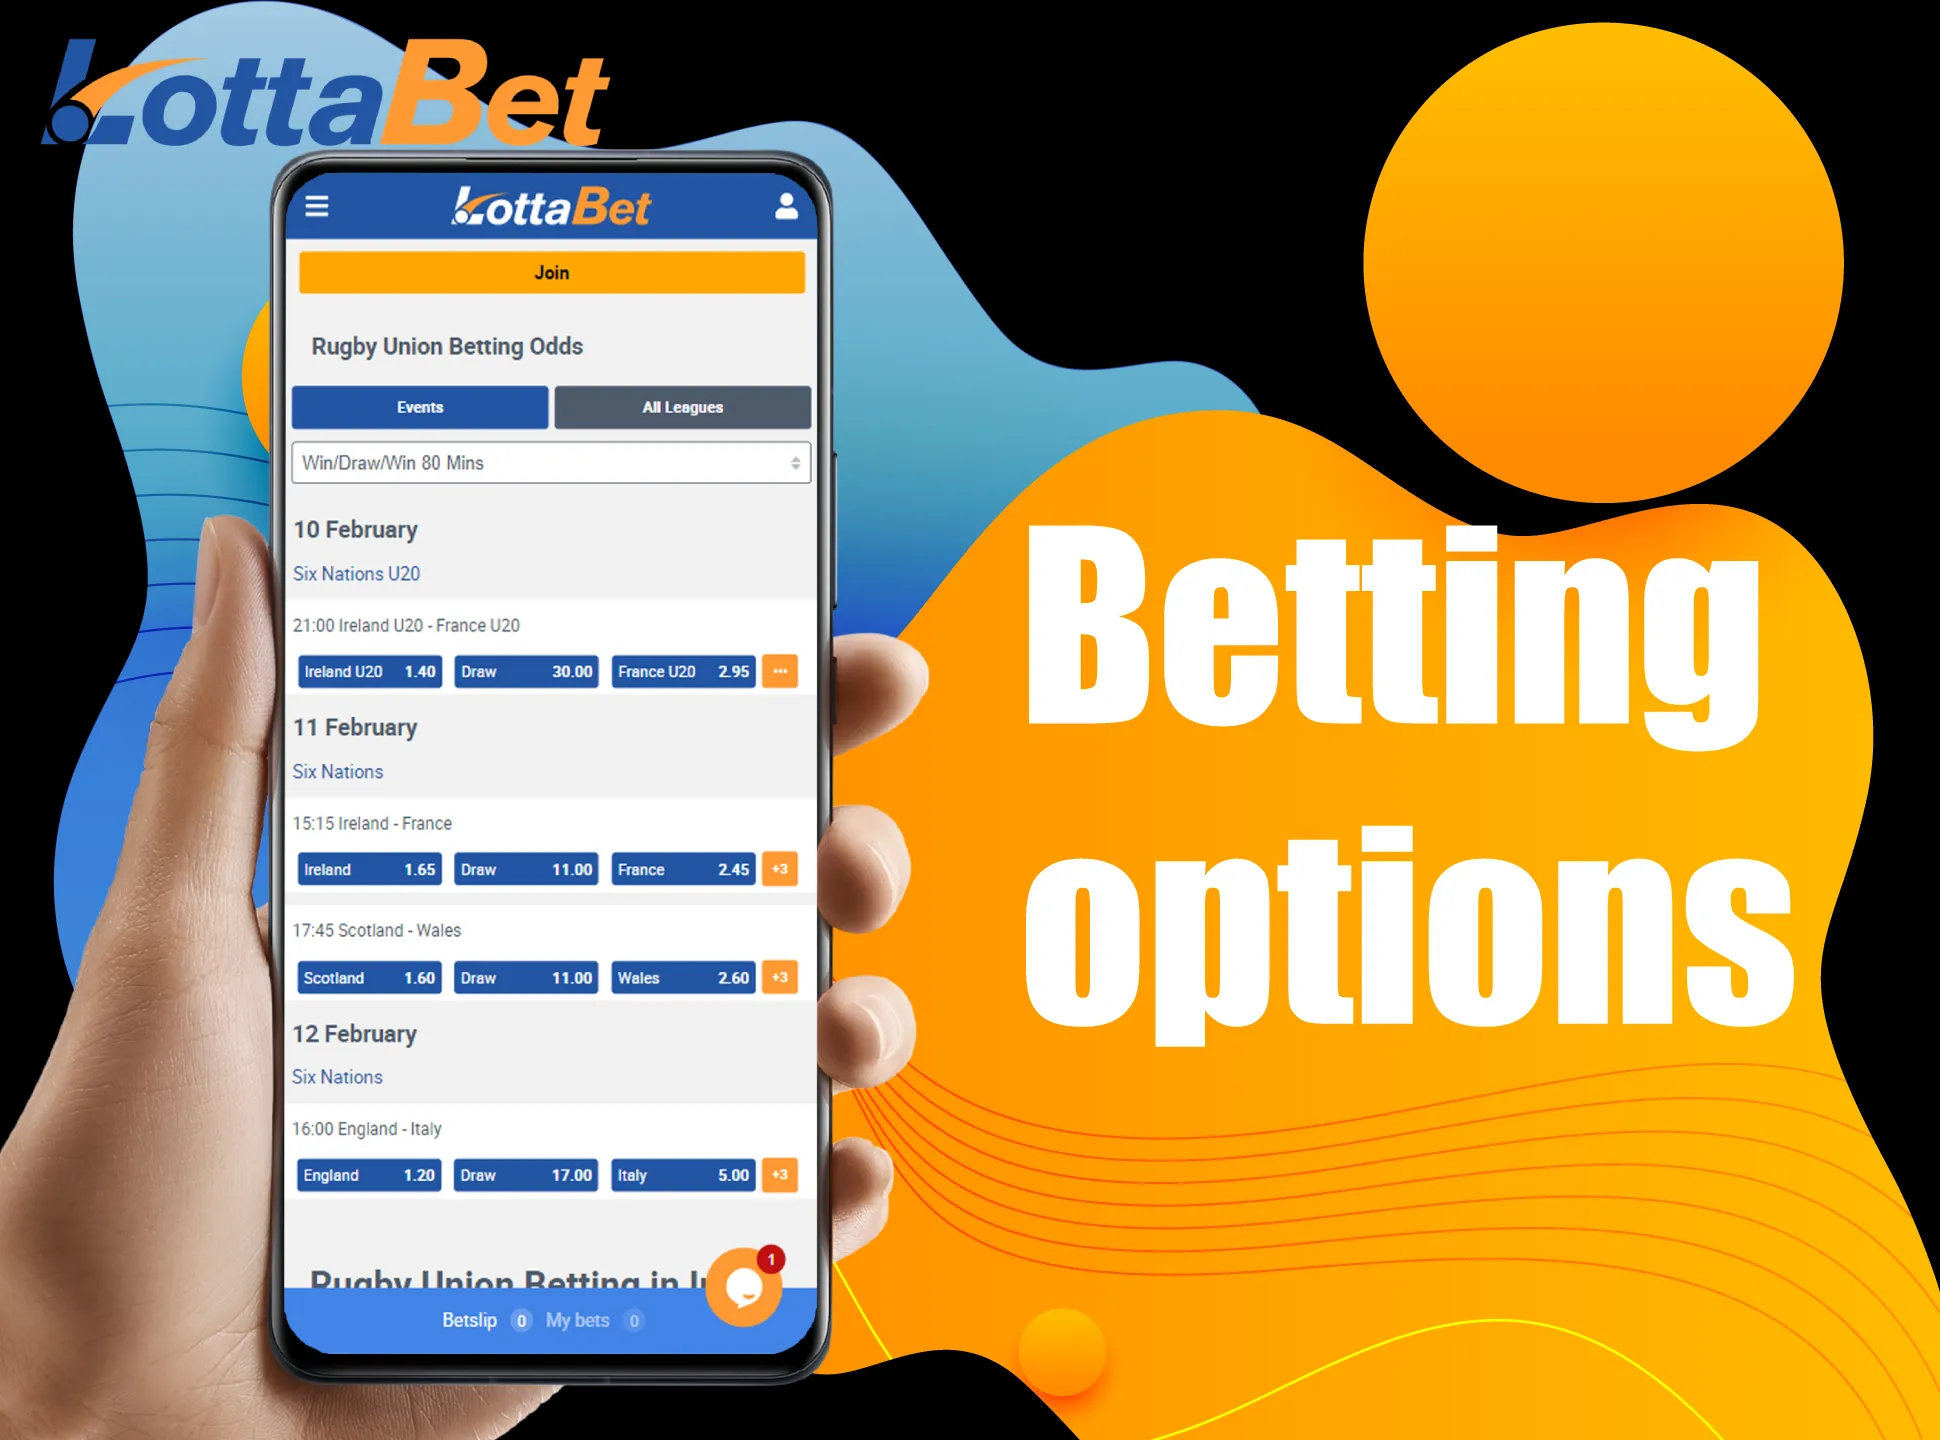 You can bet before and during tne match in the Lottabet app.